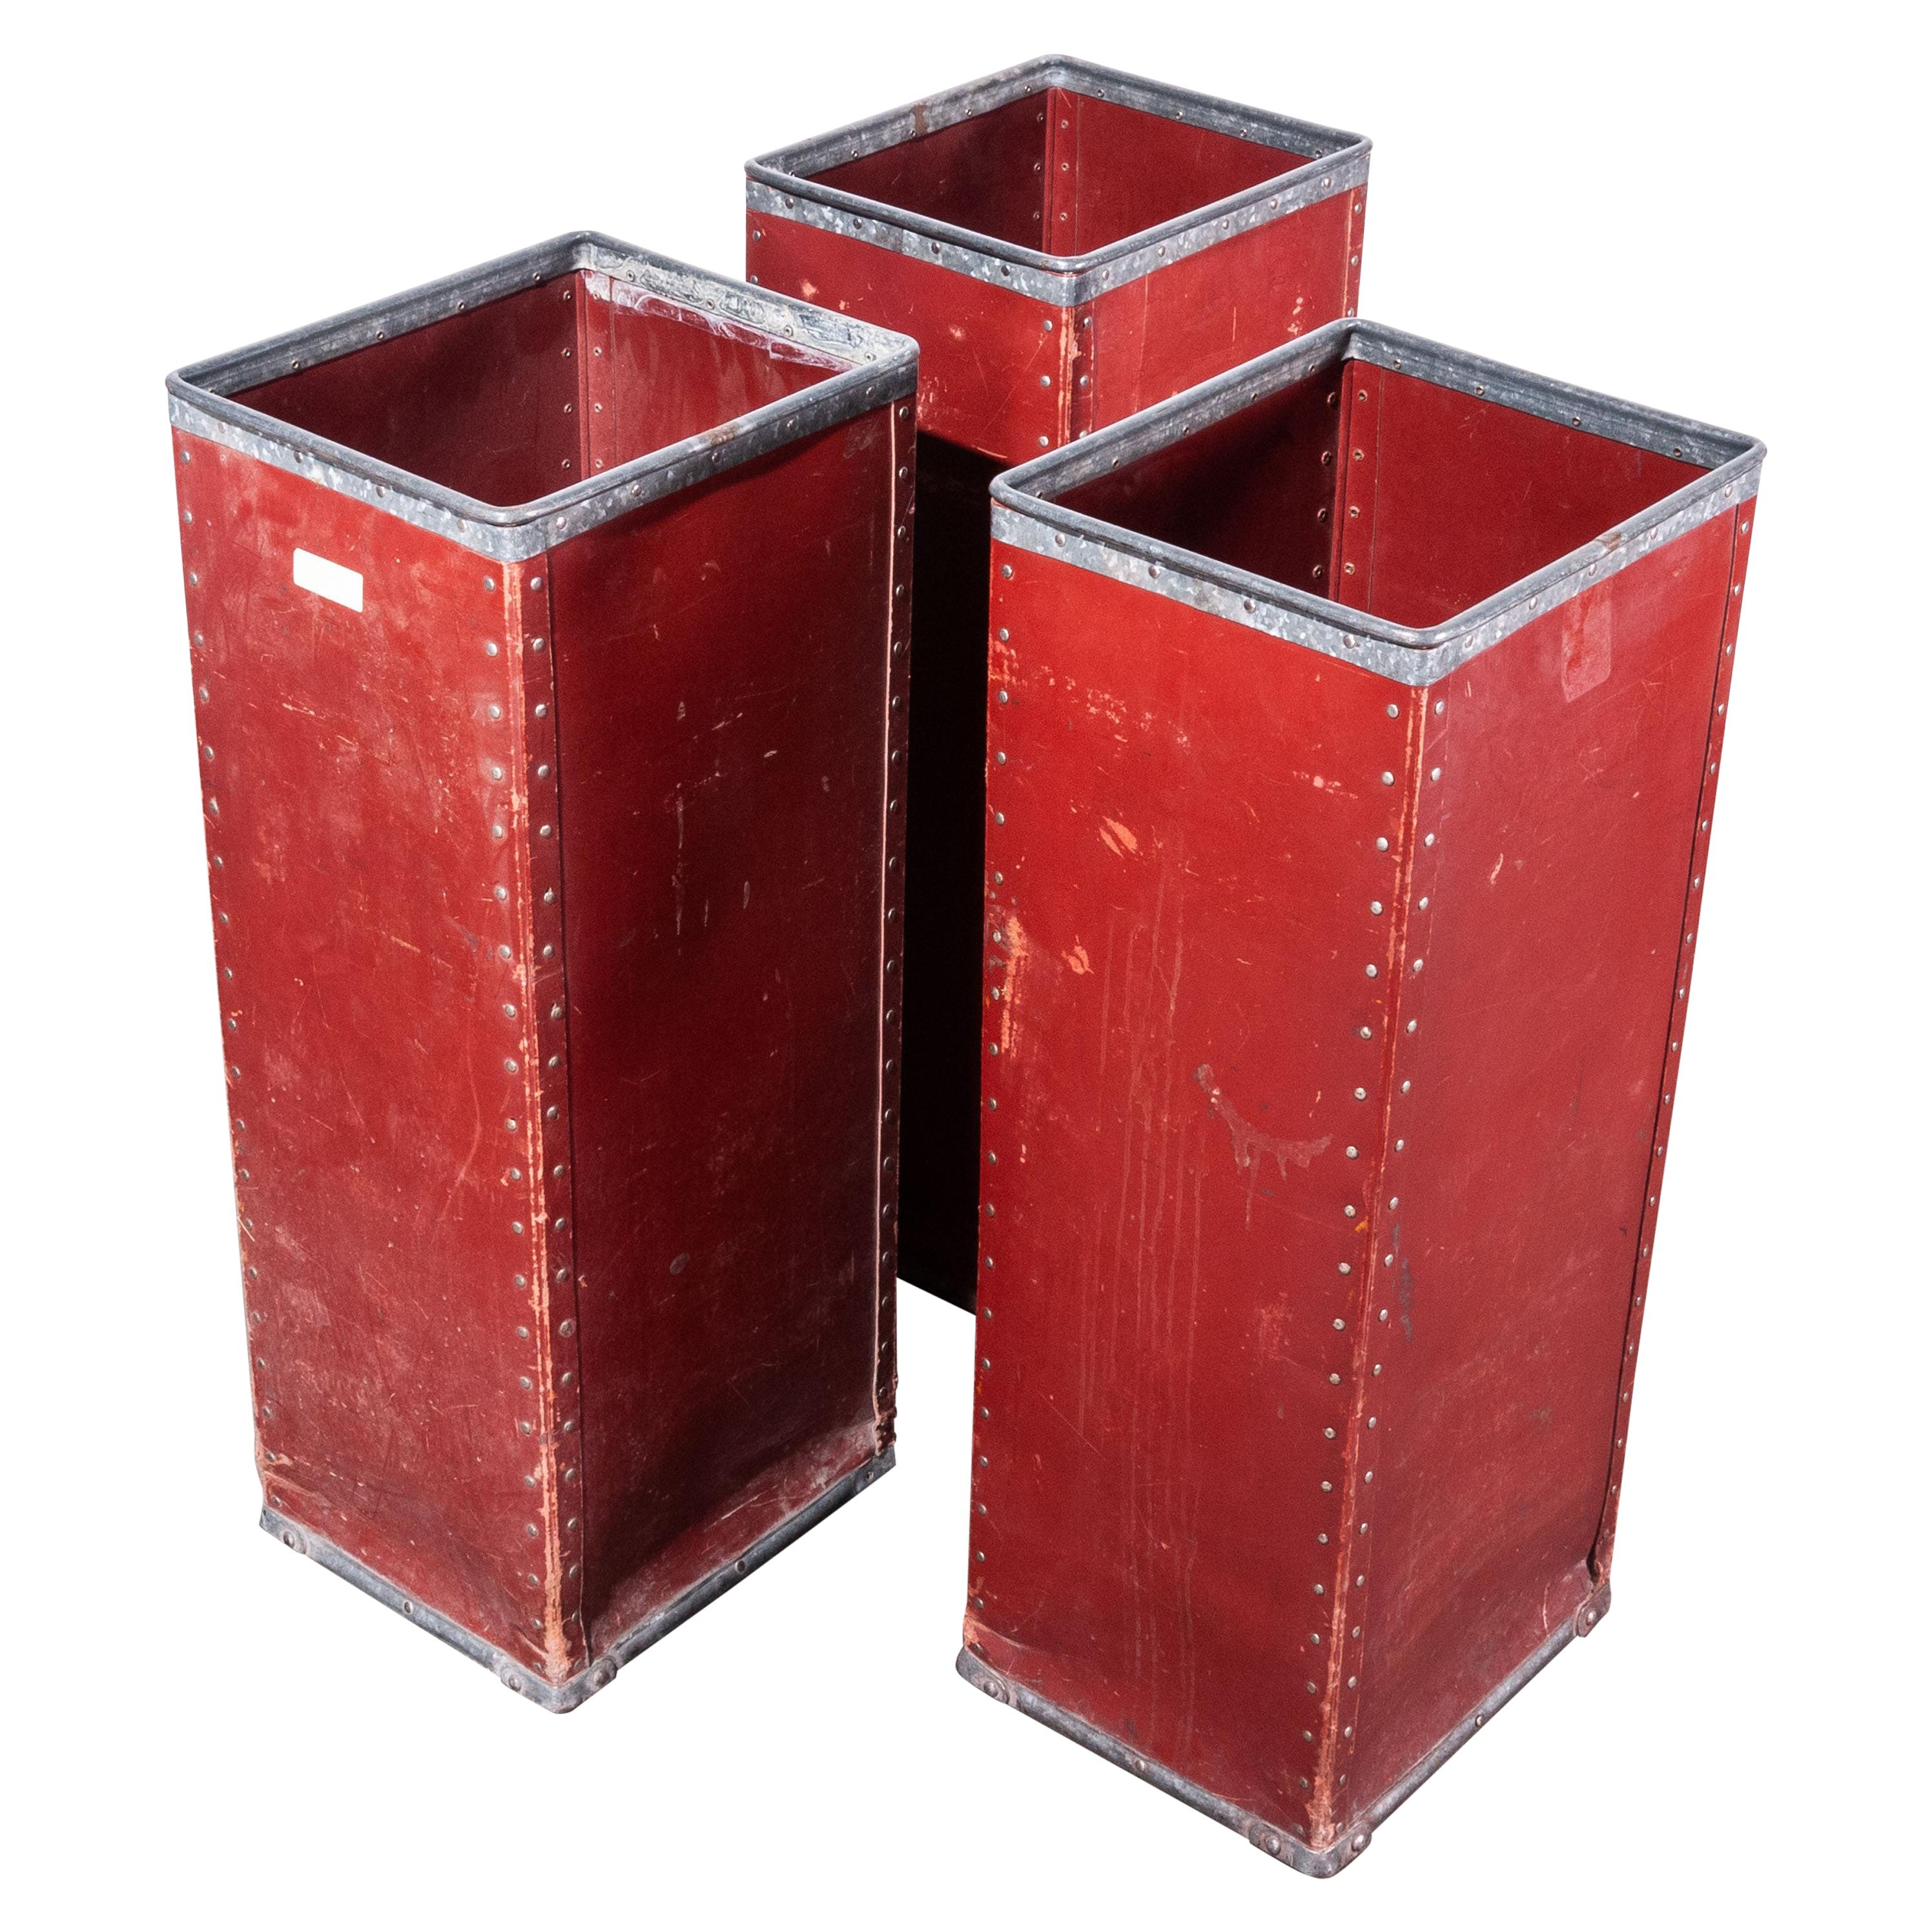 1940s Original Suroy Tall Industrial Storage Boxes, One Available